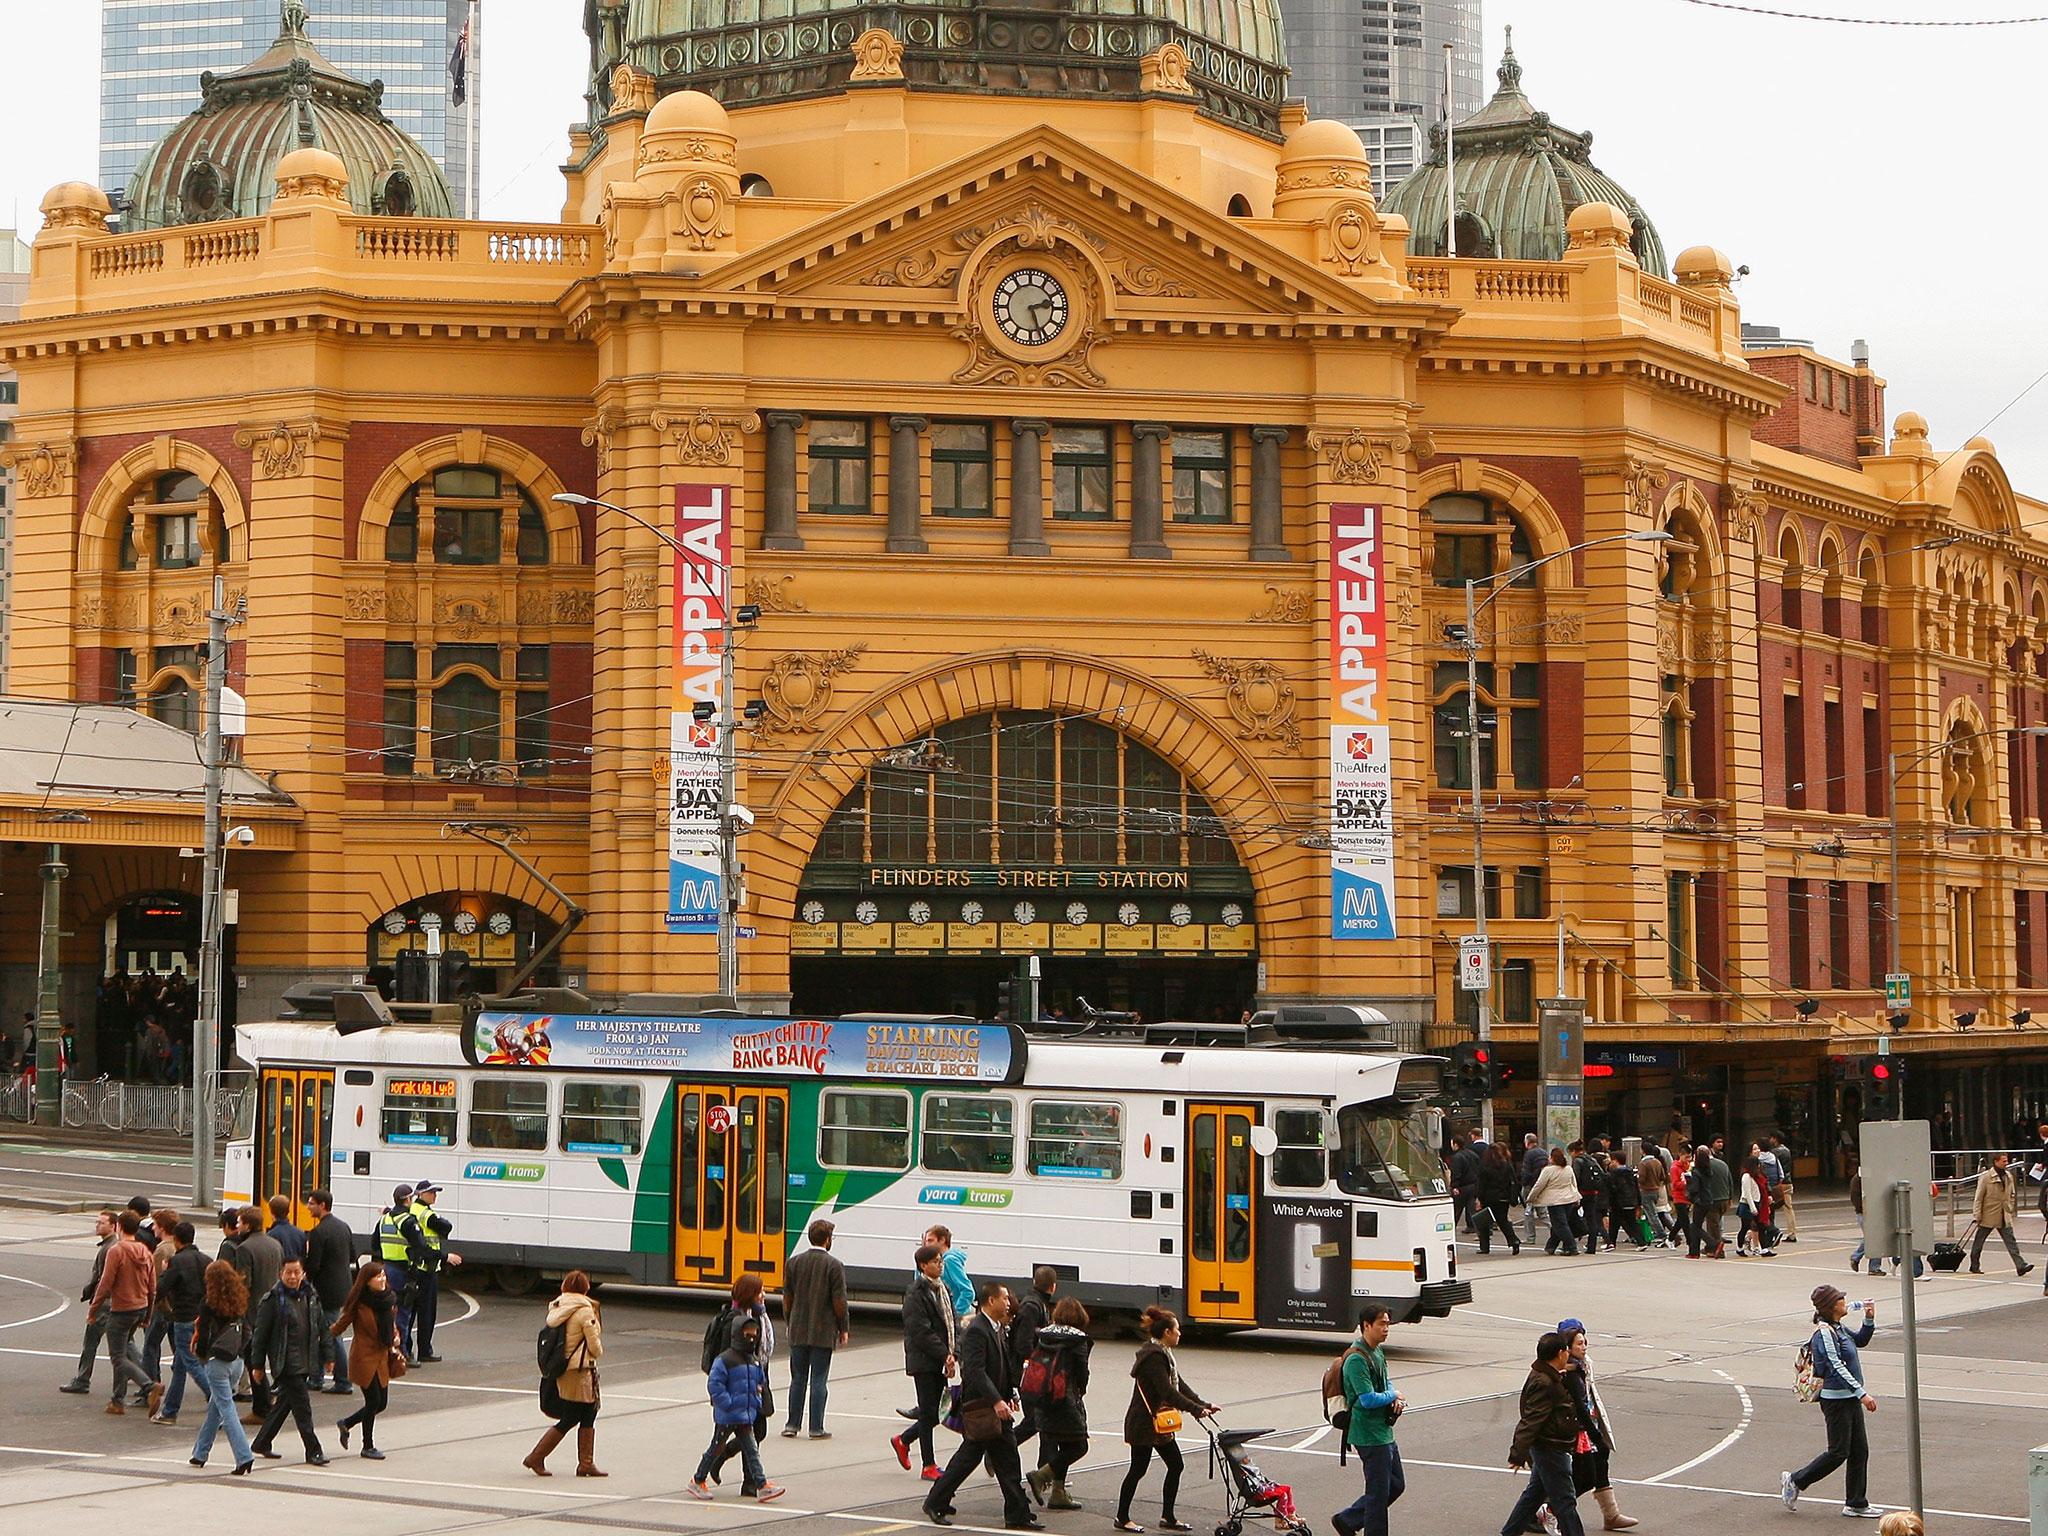 Flinders Street Railway Station was among the list of Christmas Day bombing targets